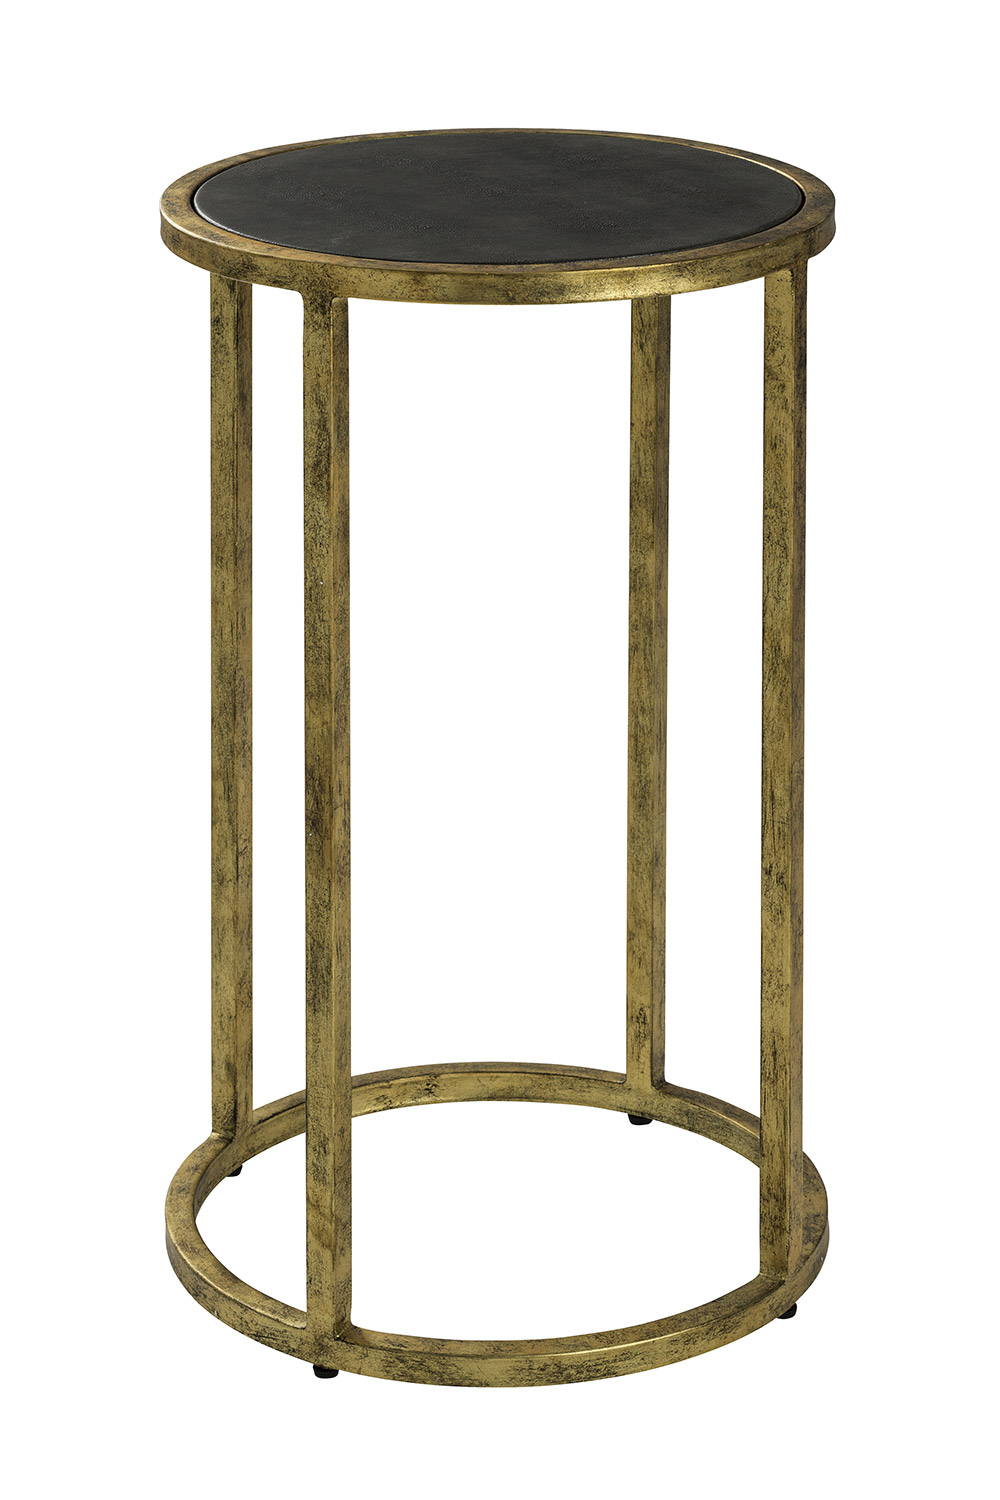 Cooper Classics Glendale Side Table - Antique Gold